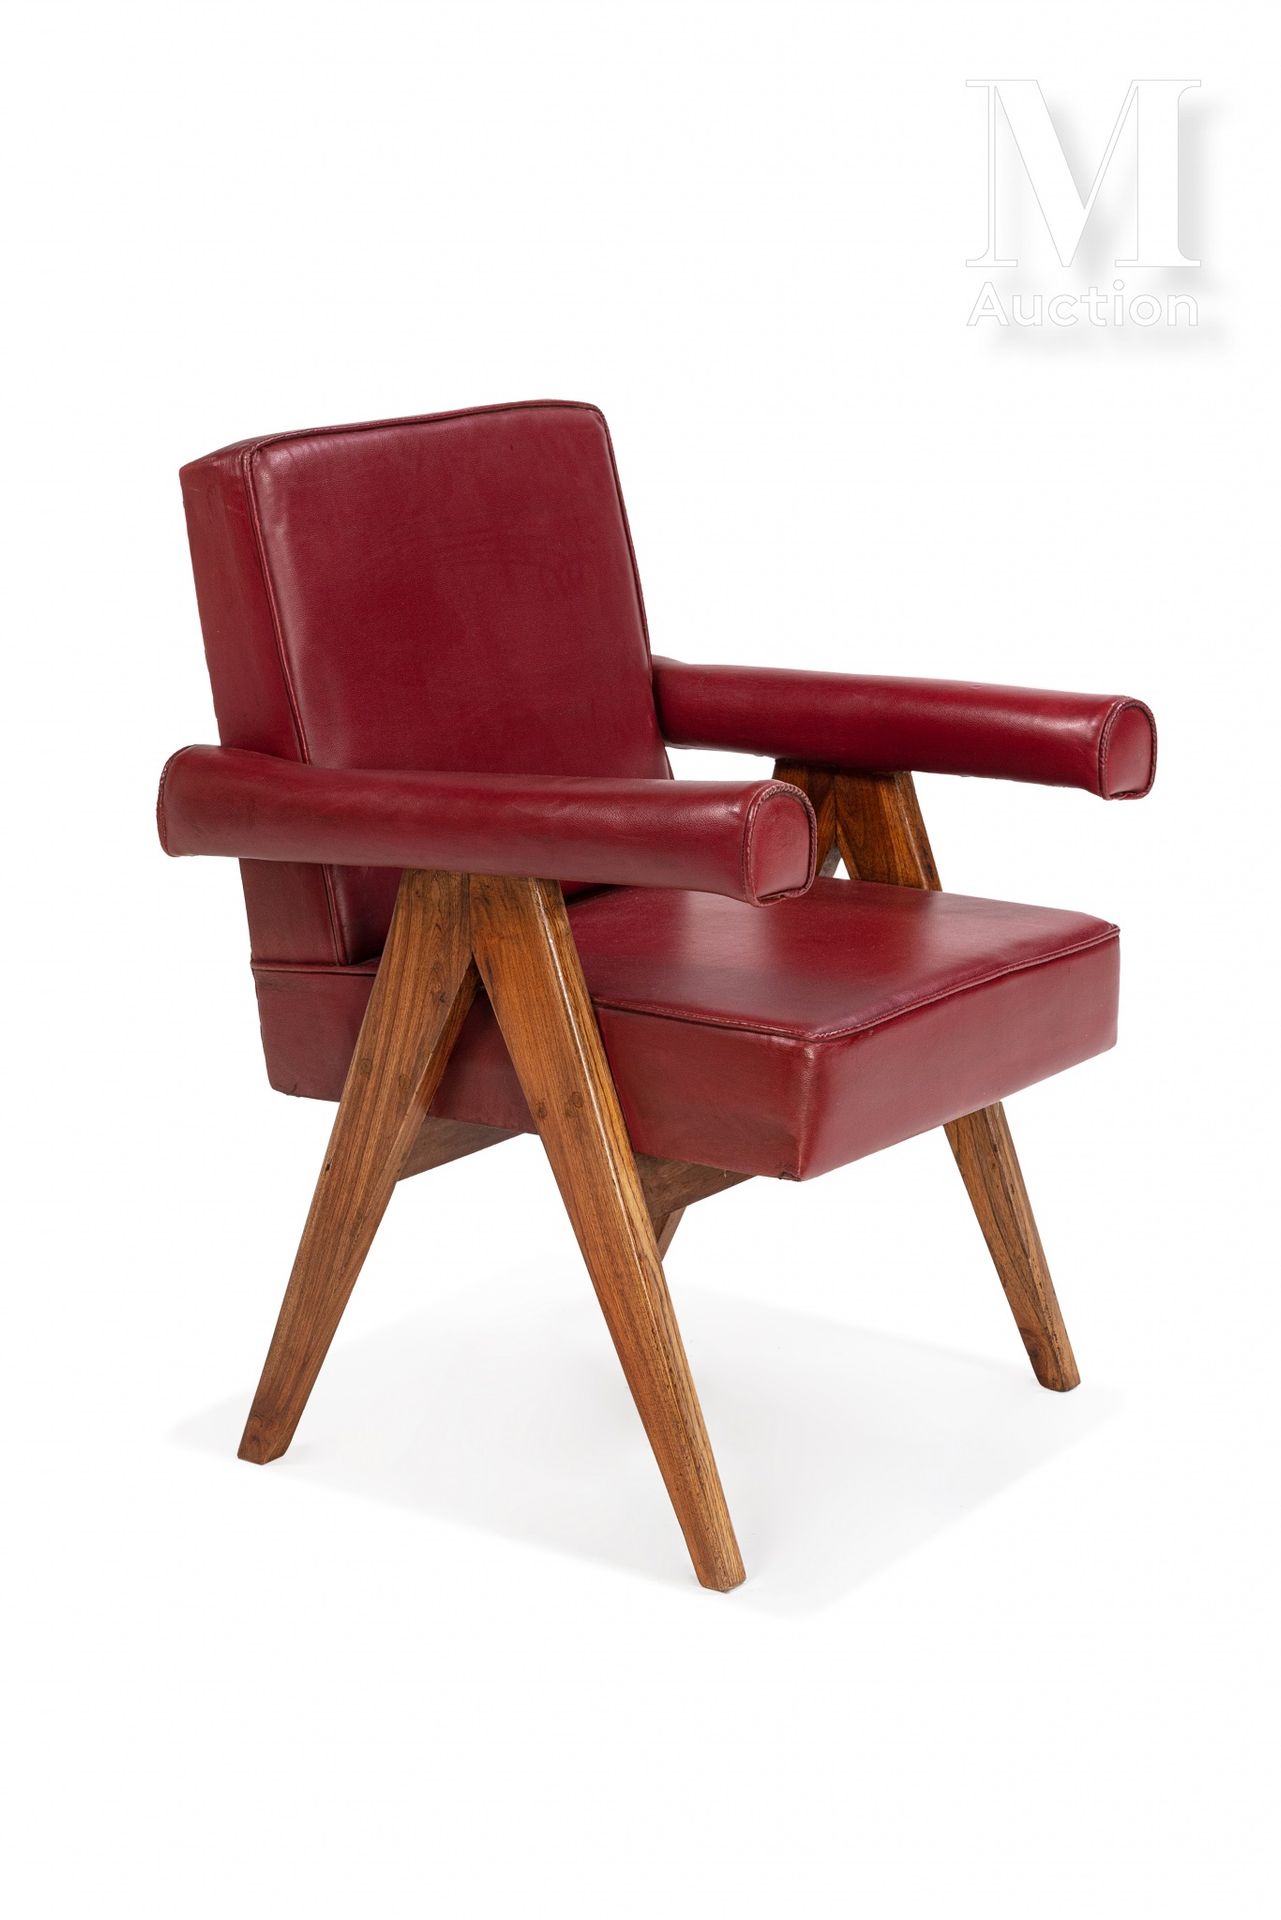 PIERRE JEANNERET (1896 - 1967) "Committee Chair

1953-54

Solid teak and red lea&hellip;